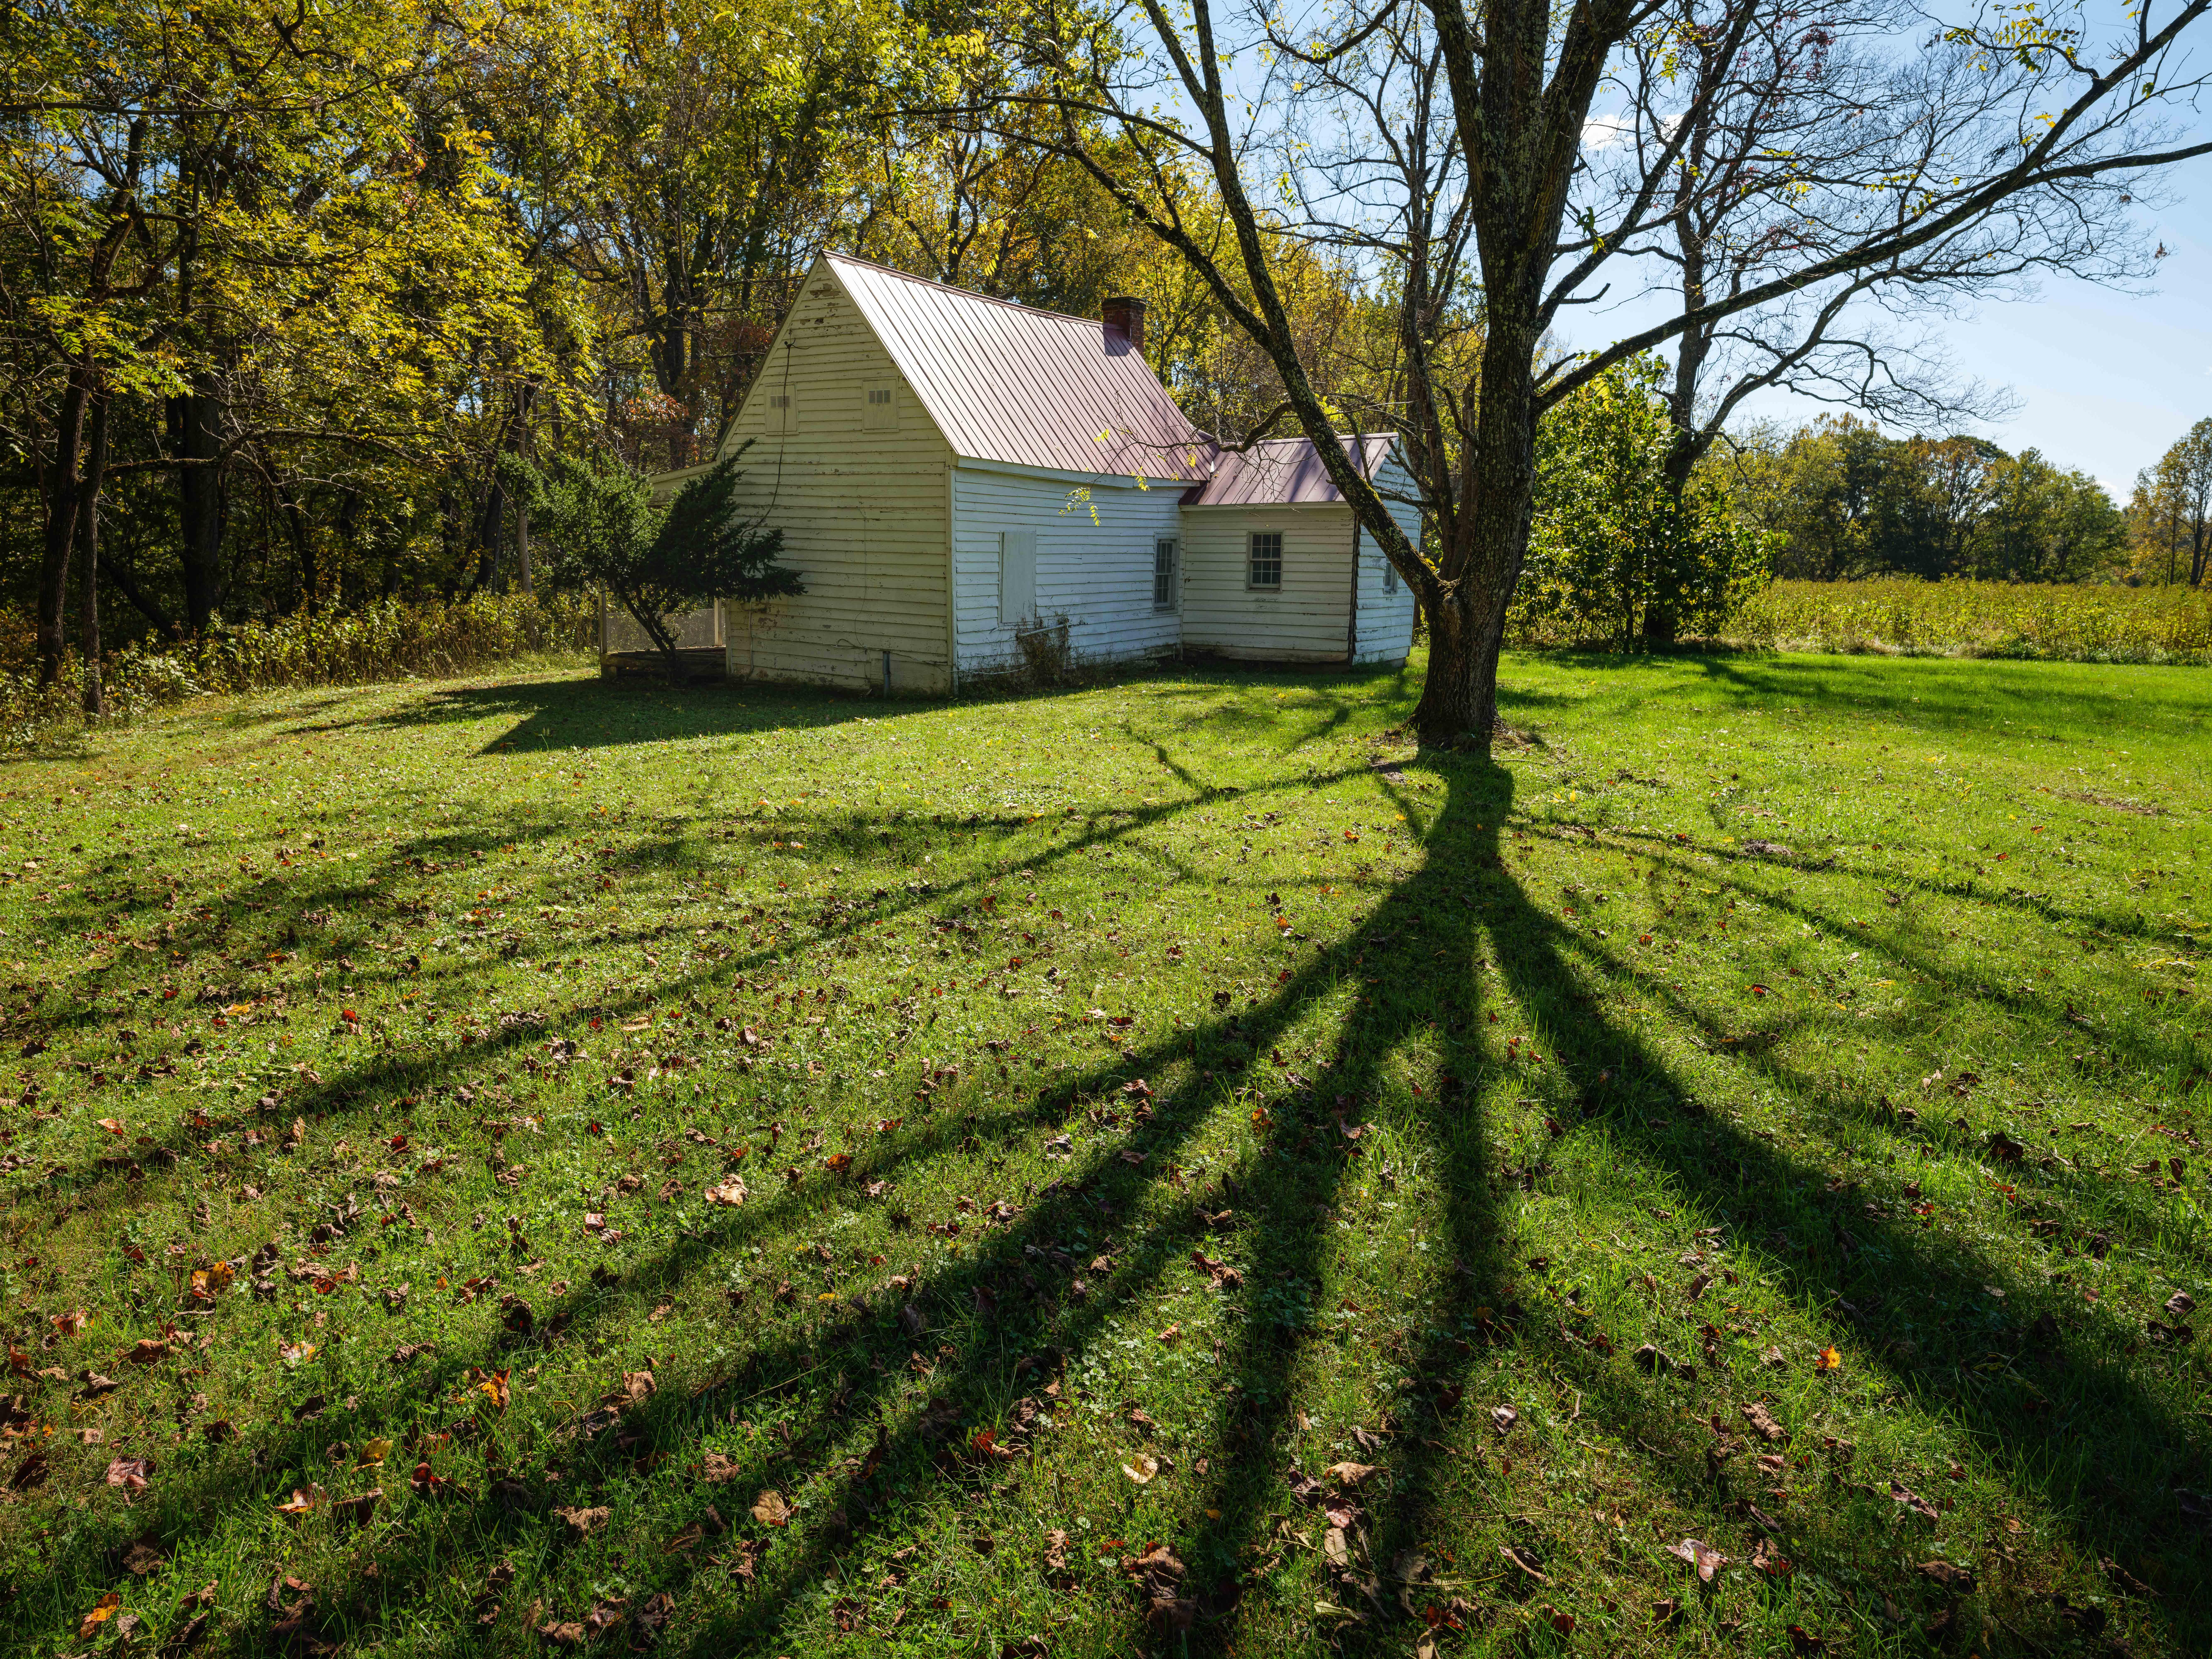 Tenet House with shadow of tree limbs